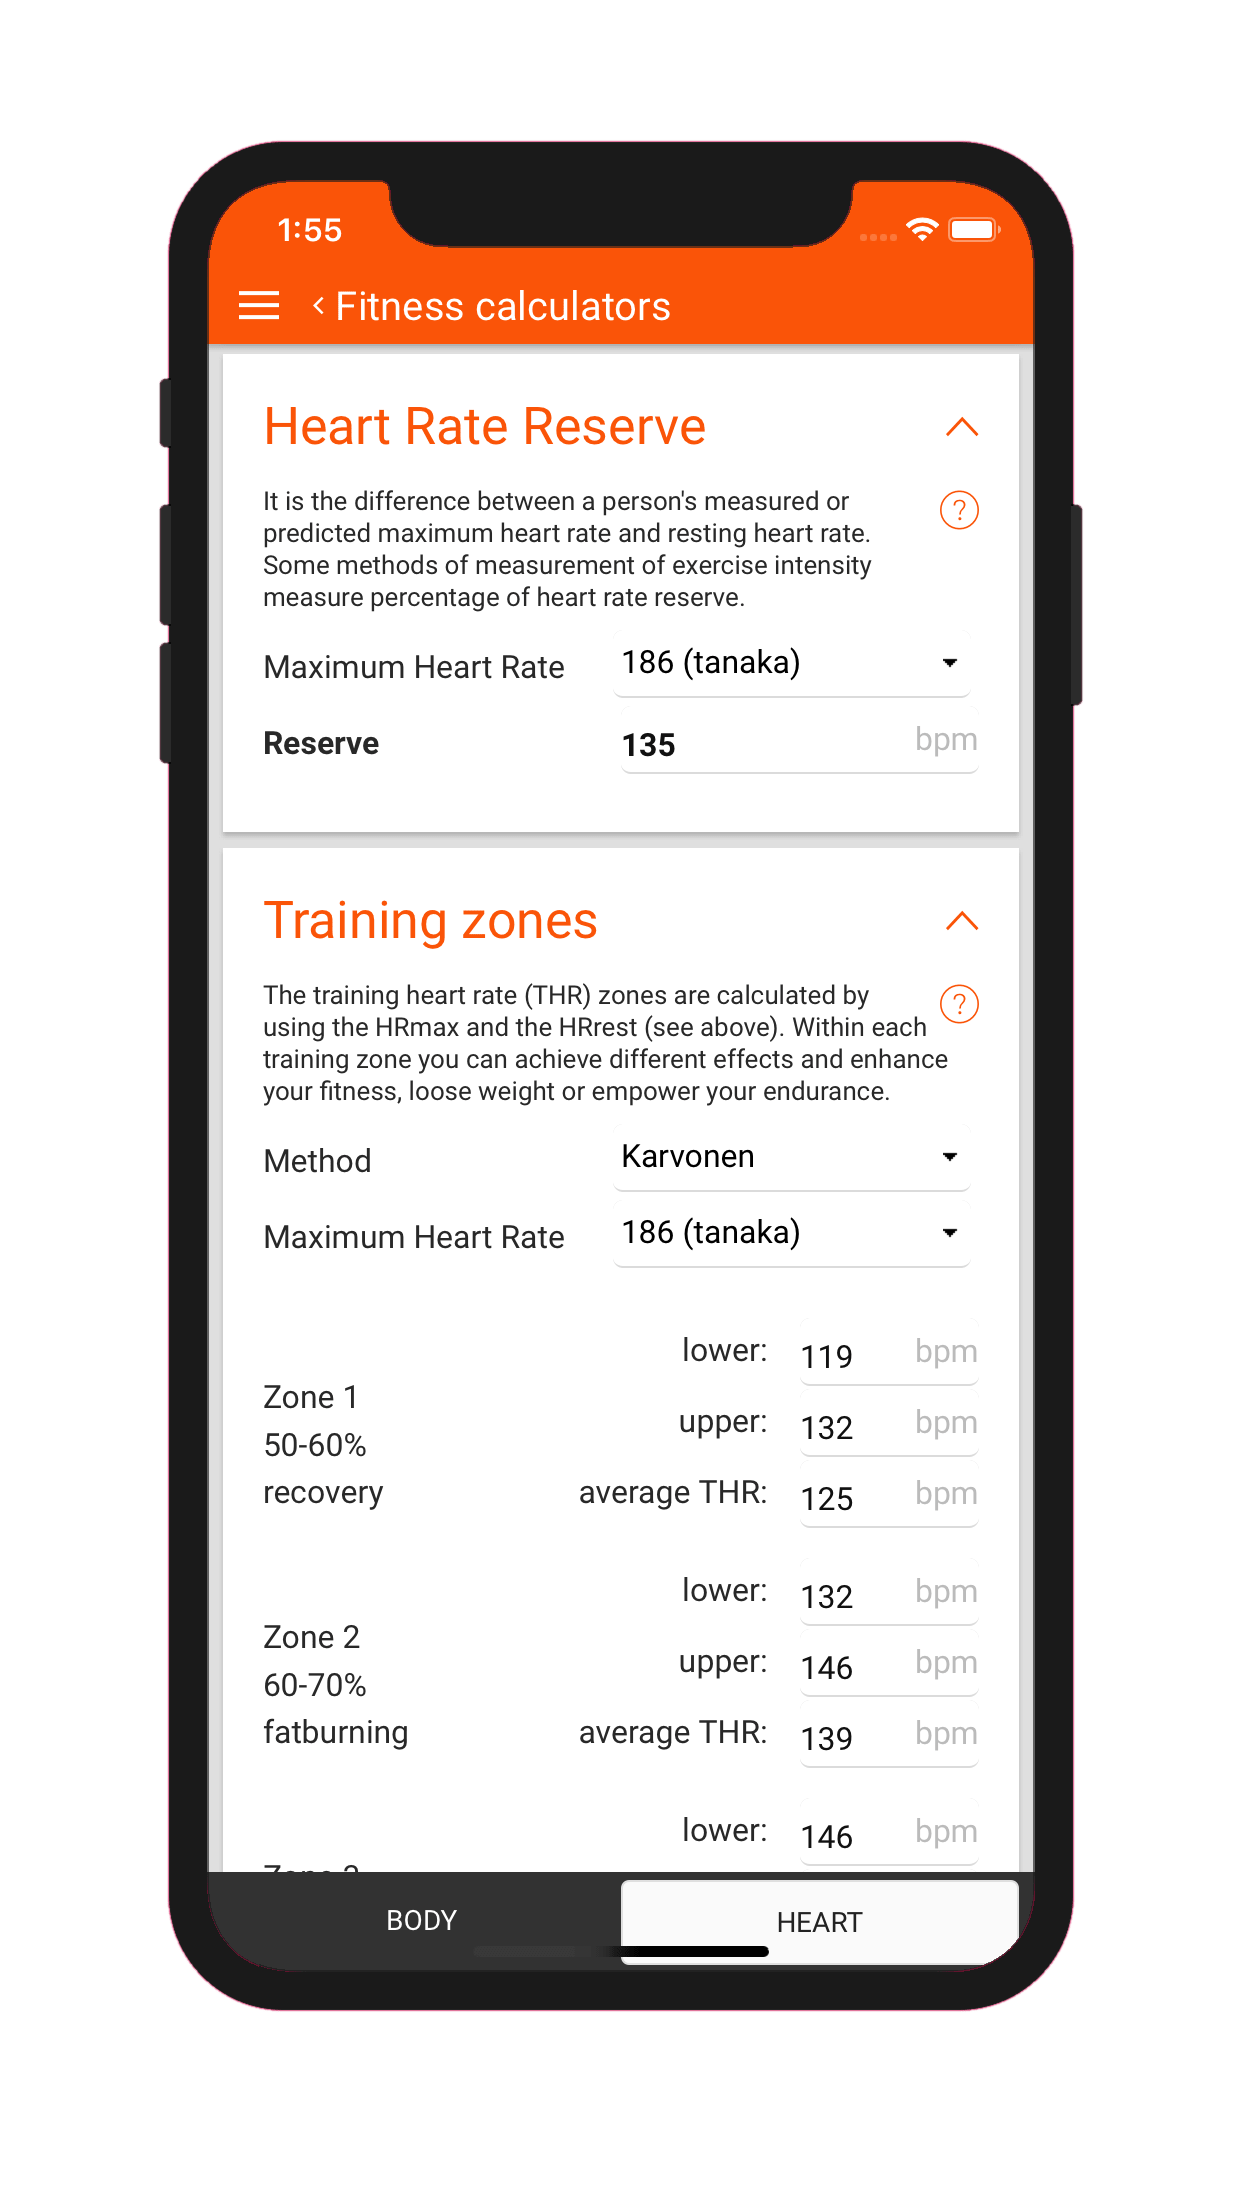 5 burn calories en min Burn'em Down! Calories + Fat - Burn calories easier. Be fit. Take care of your weight. Know your training zones - app for Android, iOS and mobile devices